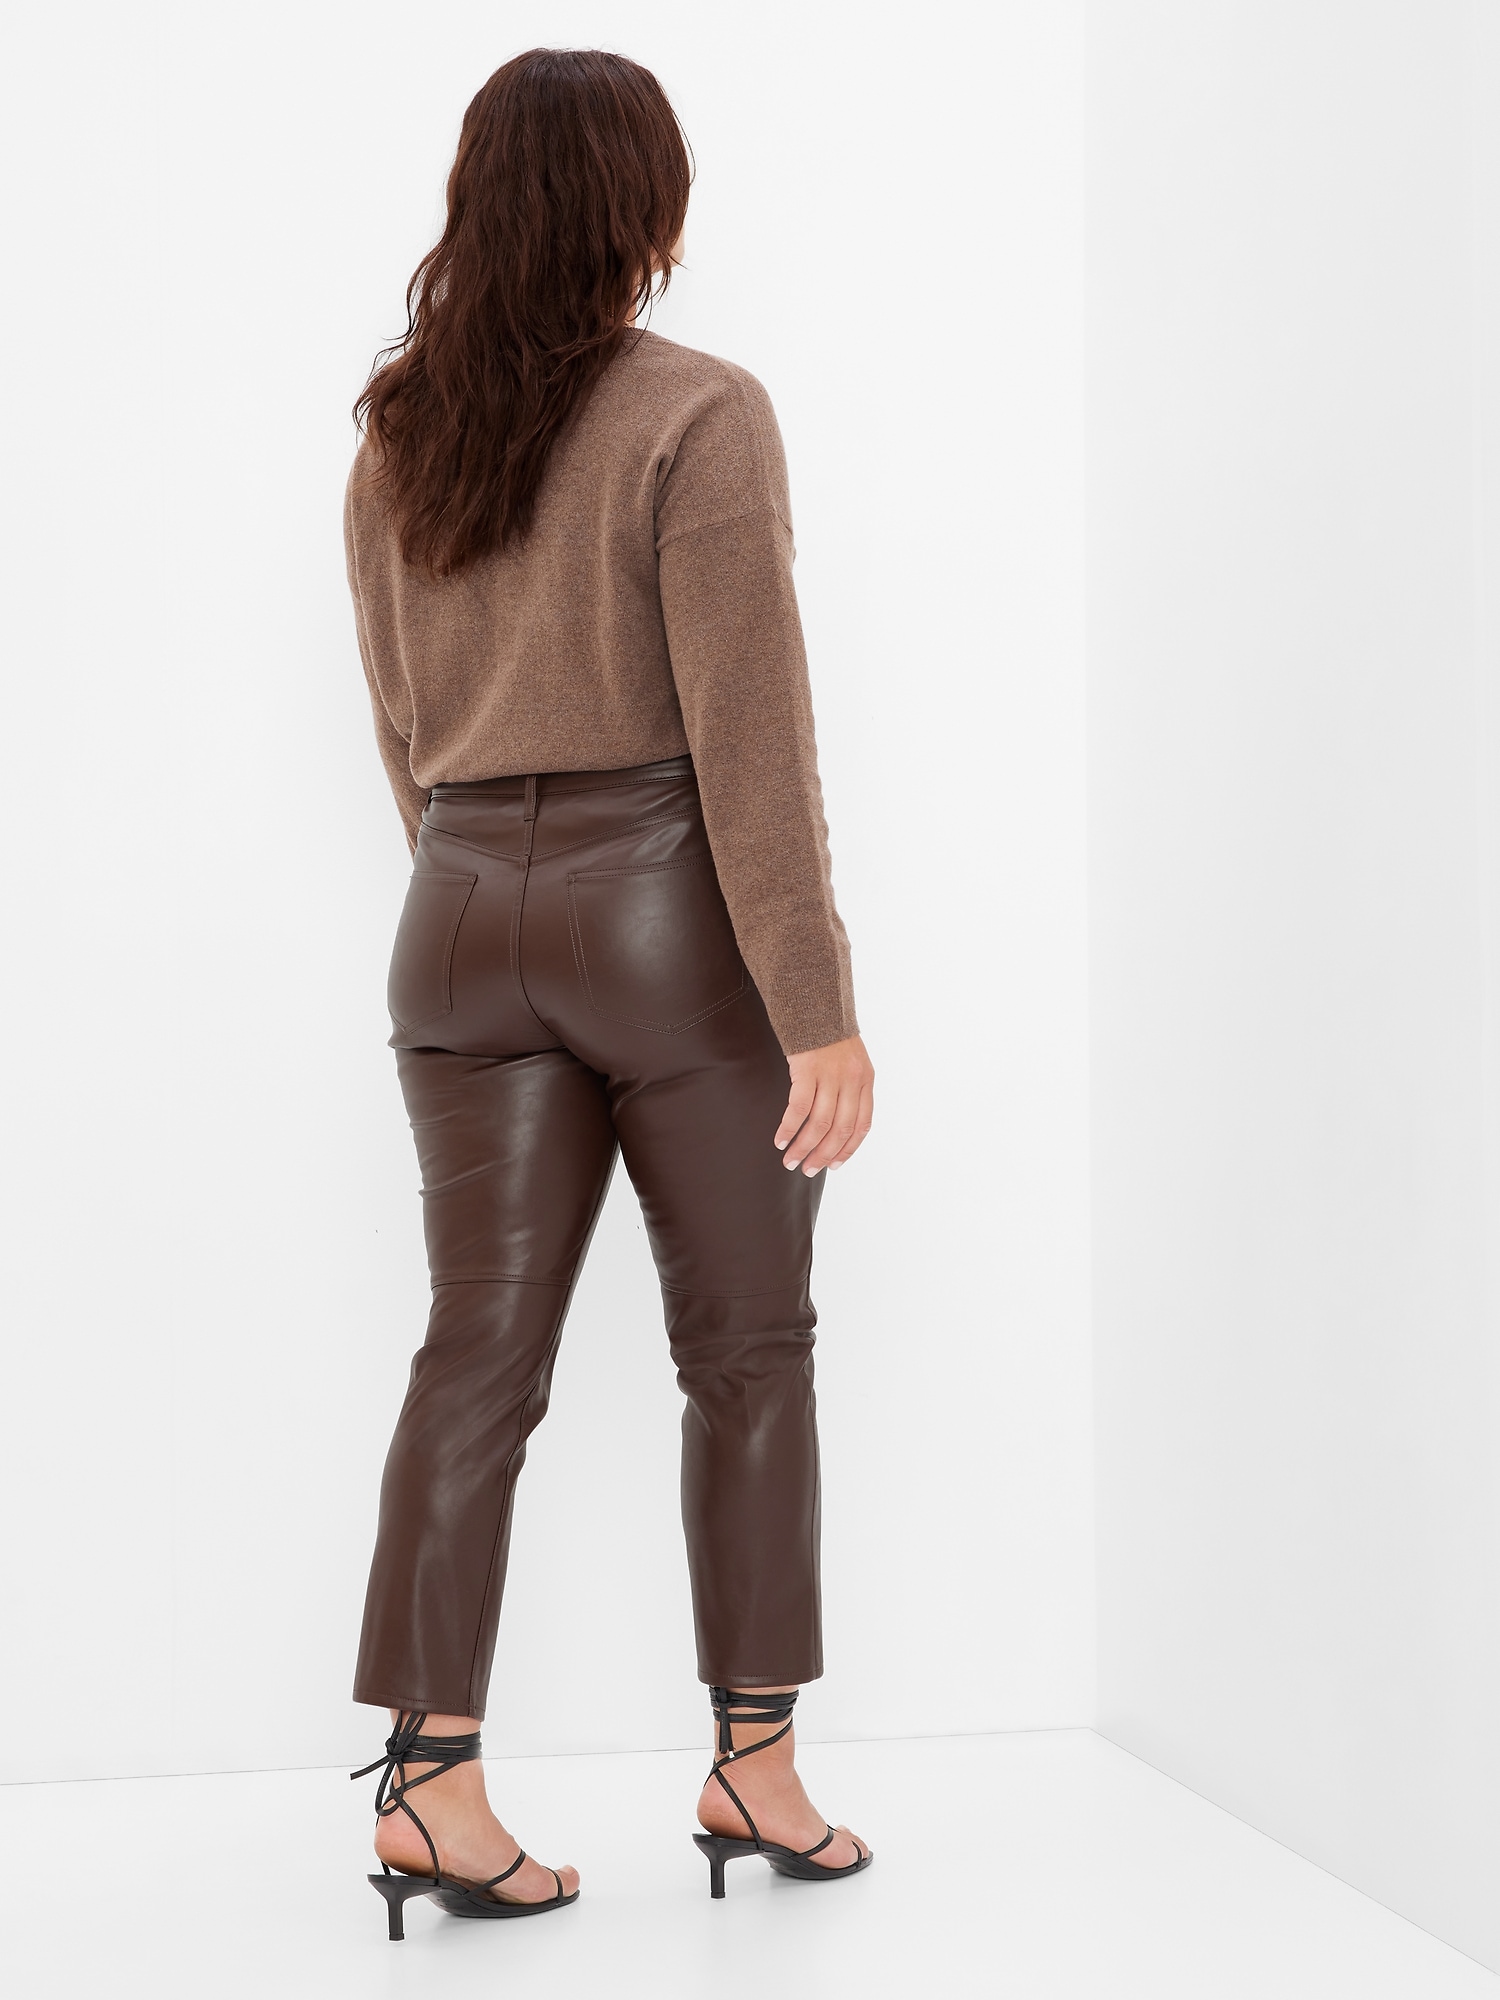 Vintage 100% Leather Brown Pants / 90's High Rise Chocolate Brown